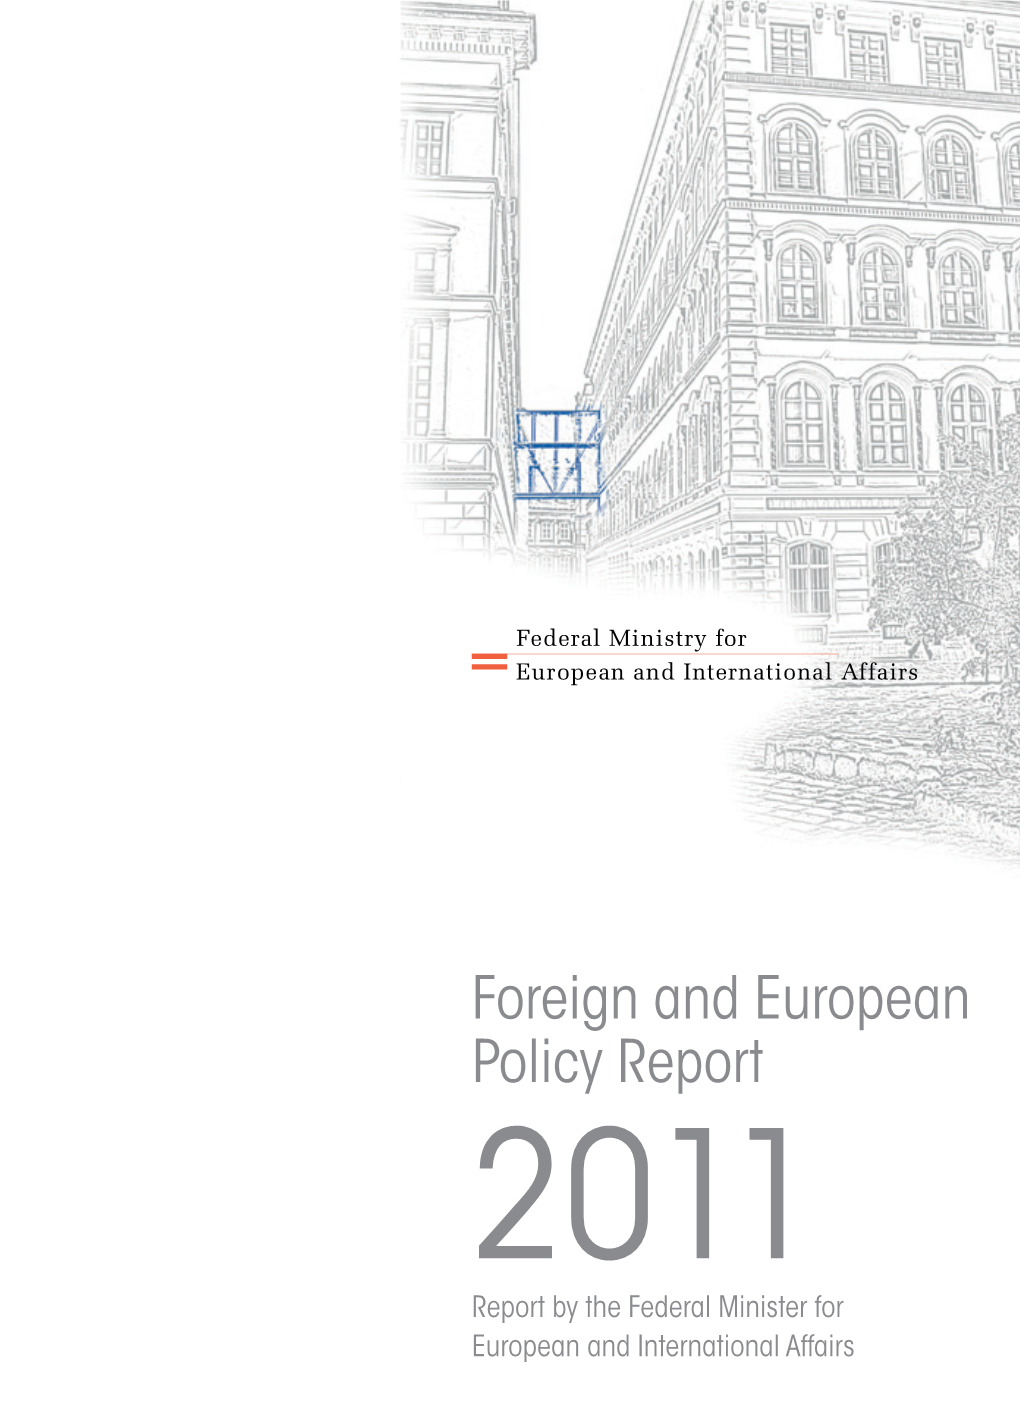 Foreign and European Policy Report 2011